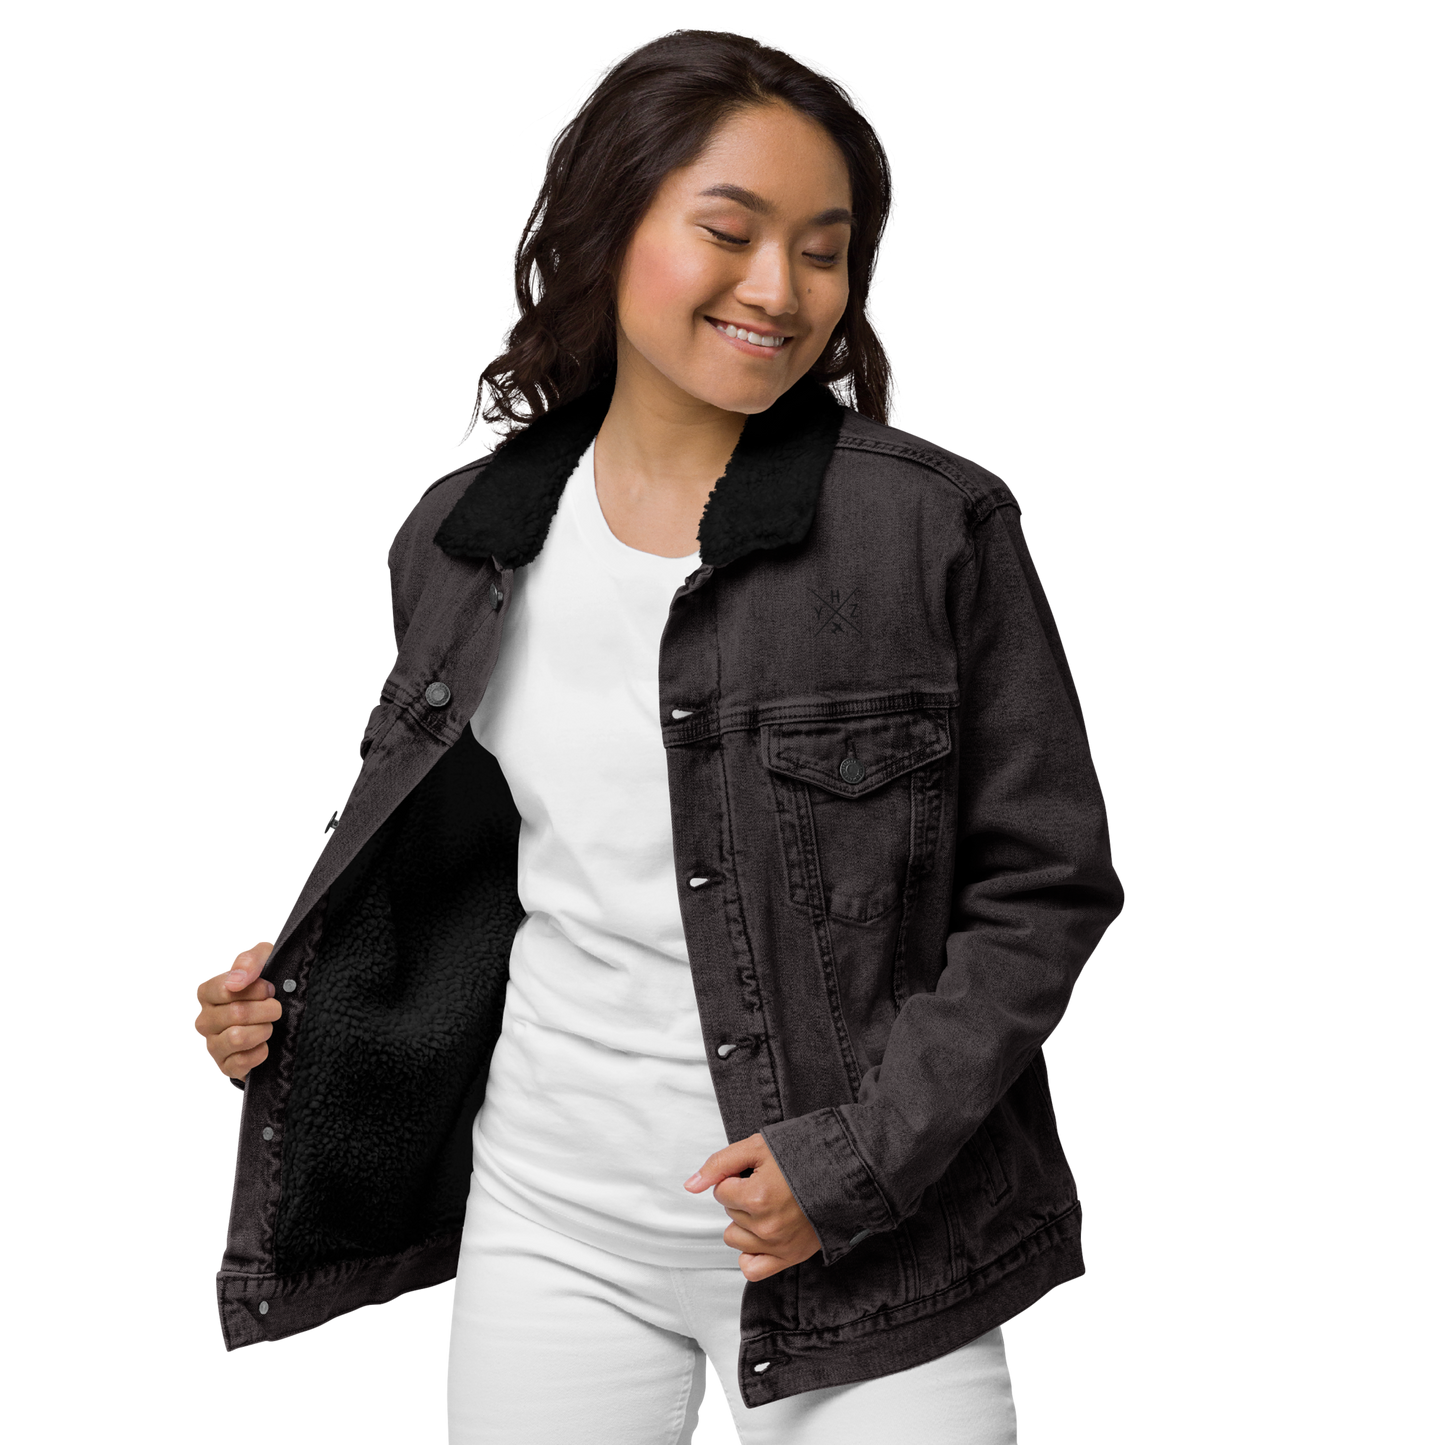 YHM Designs - YHZ Halifax Denim Sherpa Jacket - Crossed-X Design with Airport Code and Vintage Propliner - Black & White Embroidery - Image 05